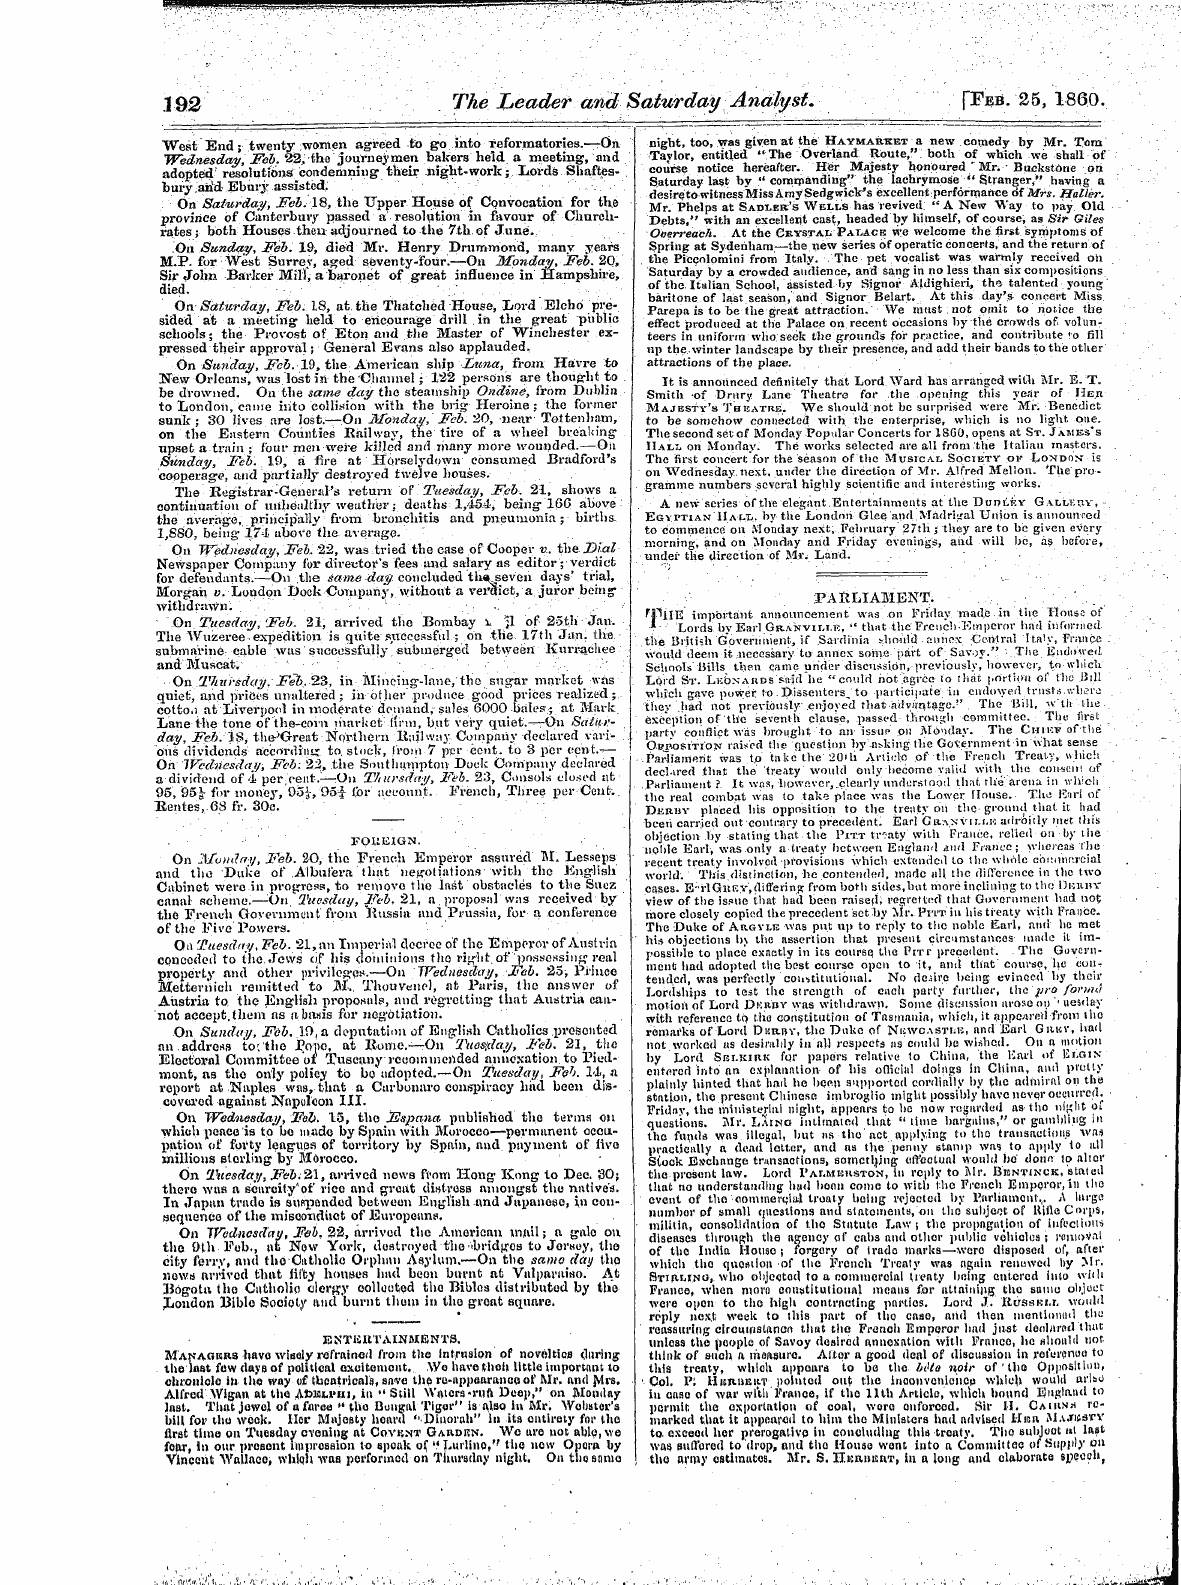 Leader (1850-1860): jS F Y, 1st edition: 20